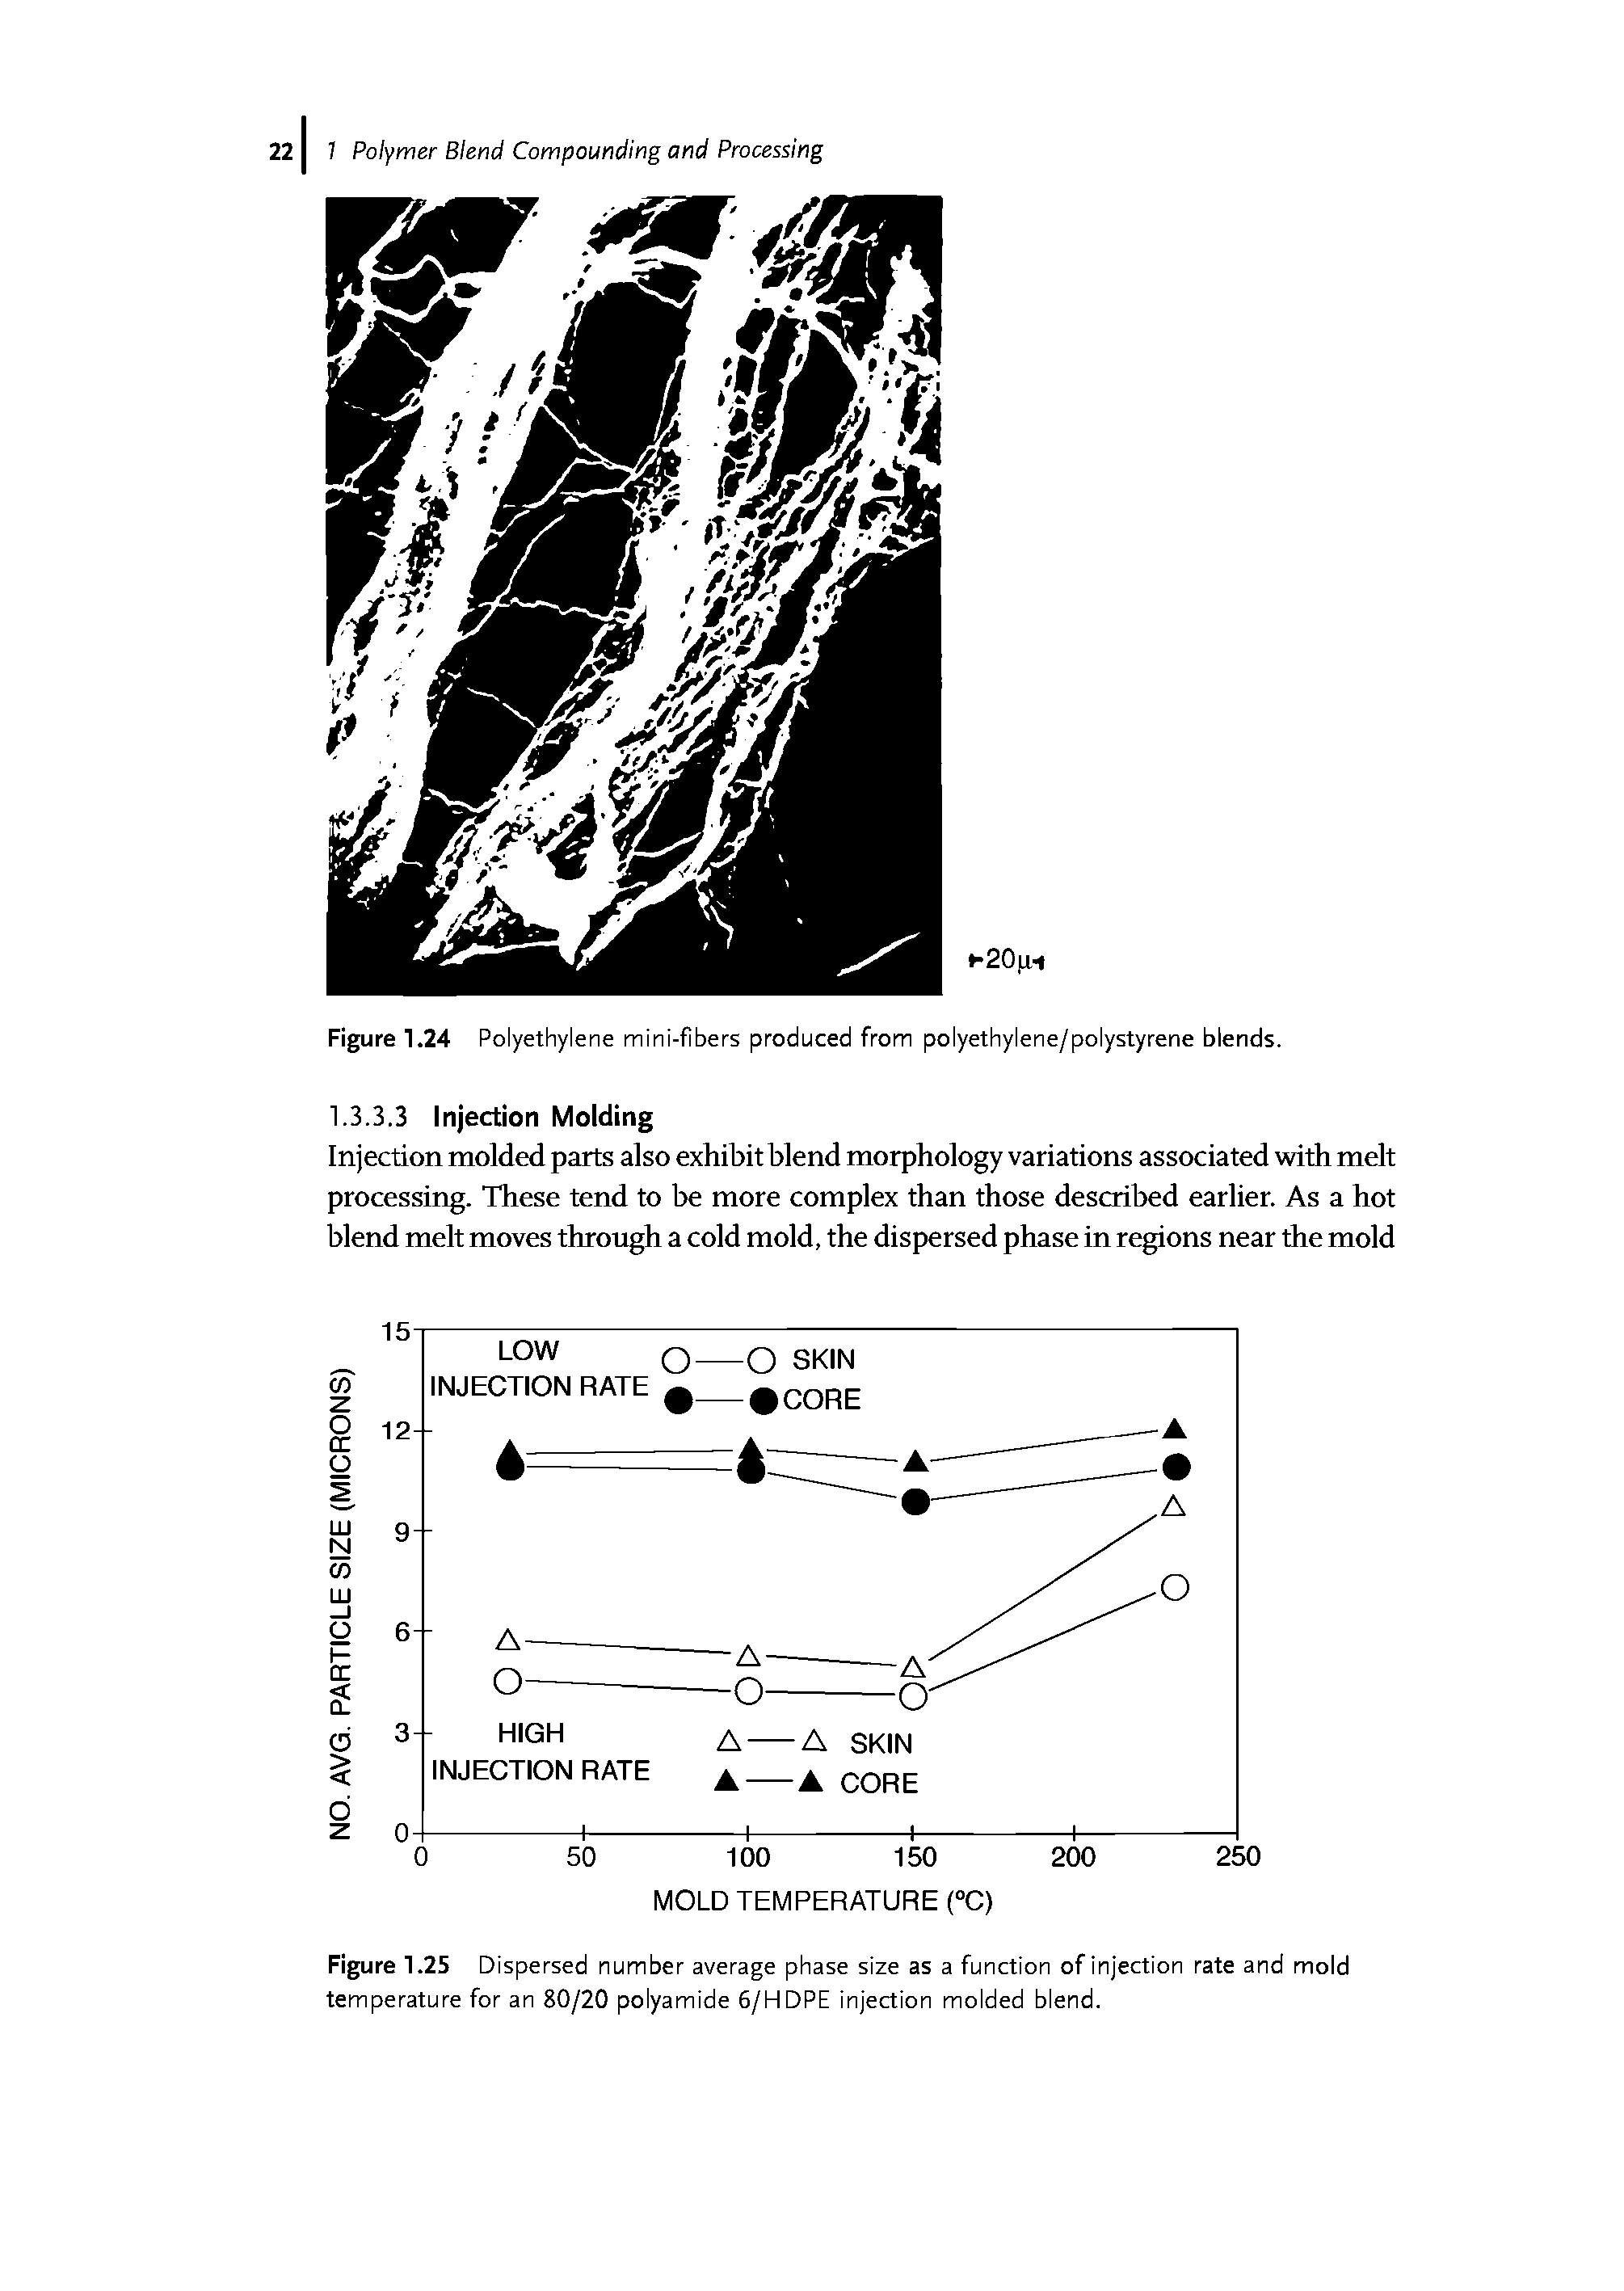 Figure 1.25 Dispersed number average phase size as a function of injection rate and mold temperature for an 80/20 polyamide 6/HDPE injection molded blend.